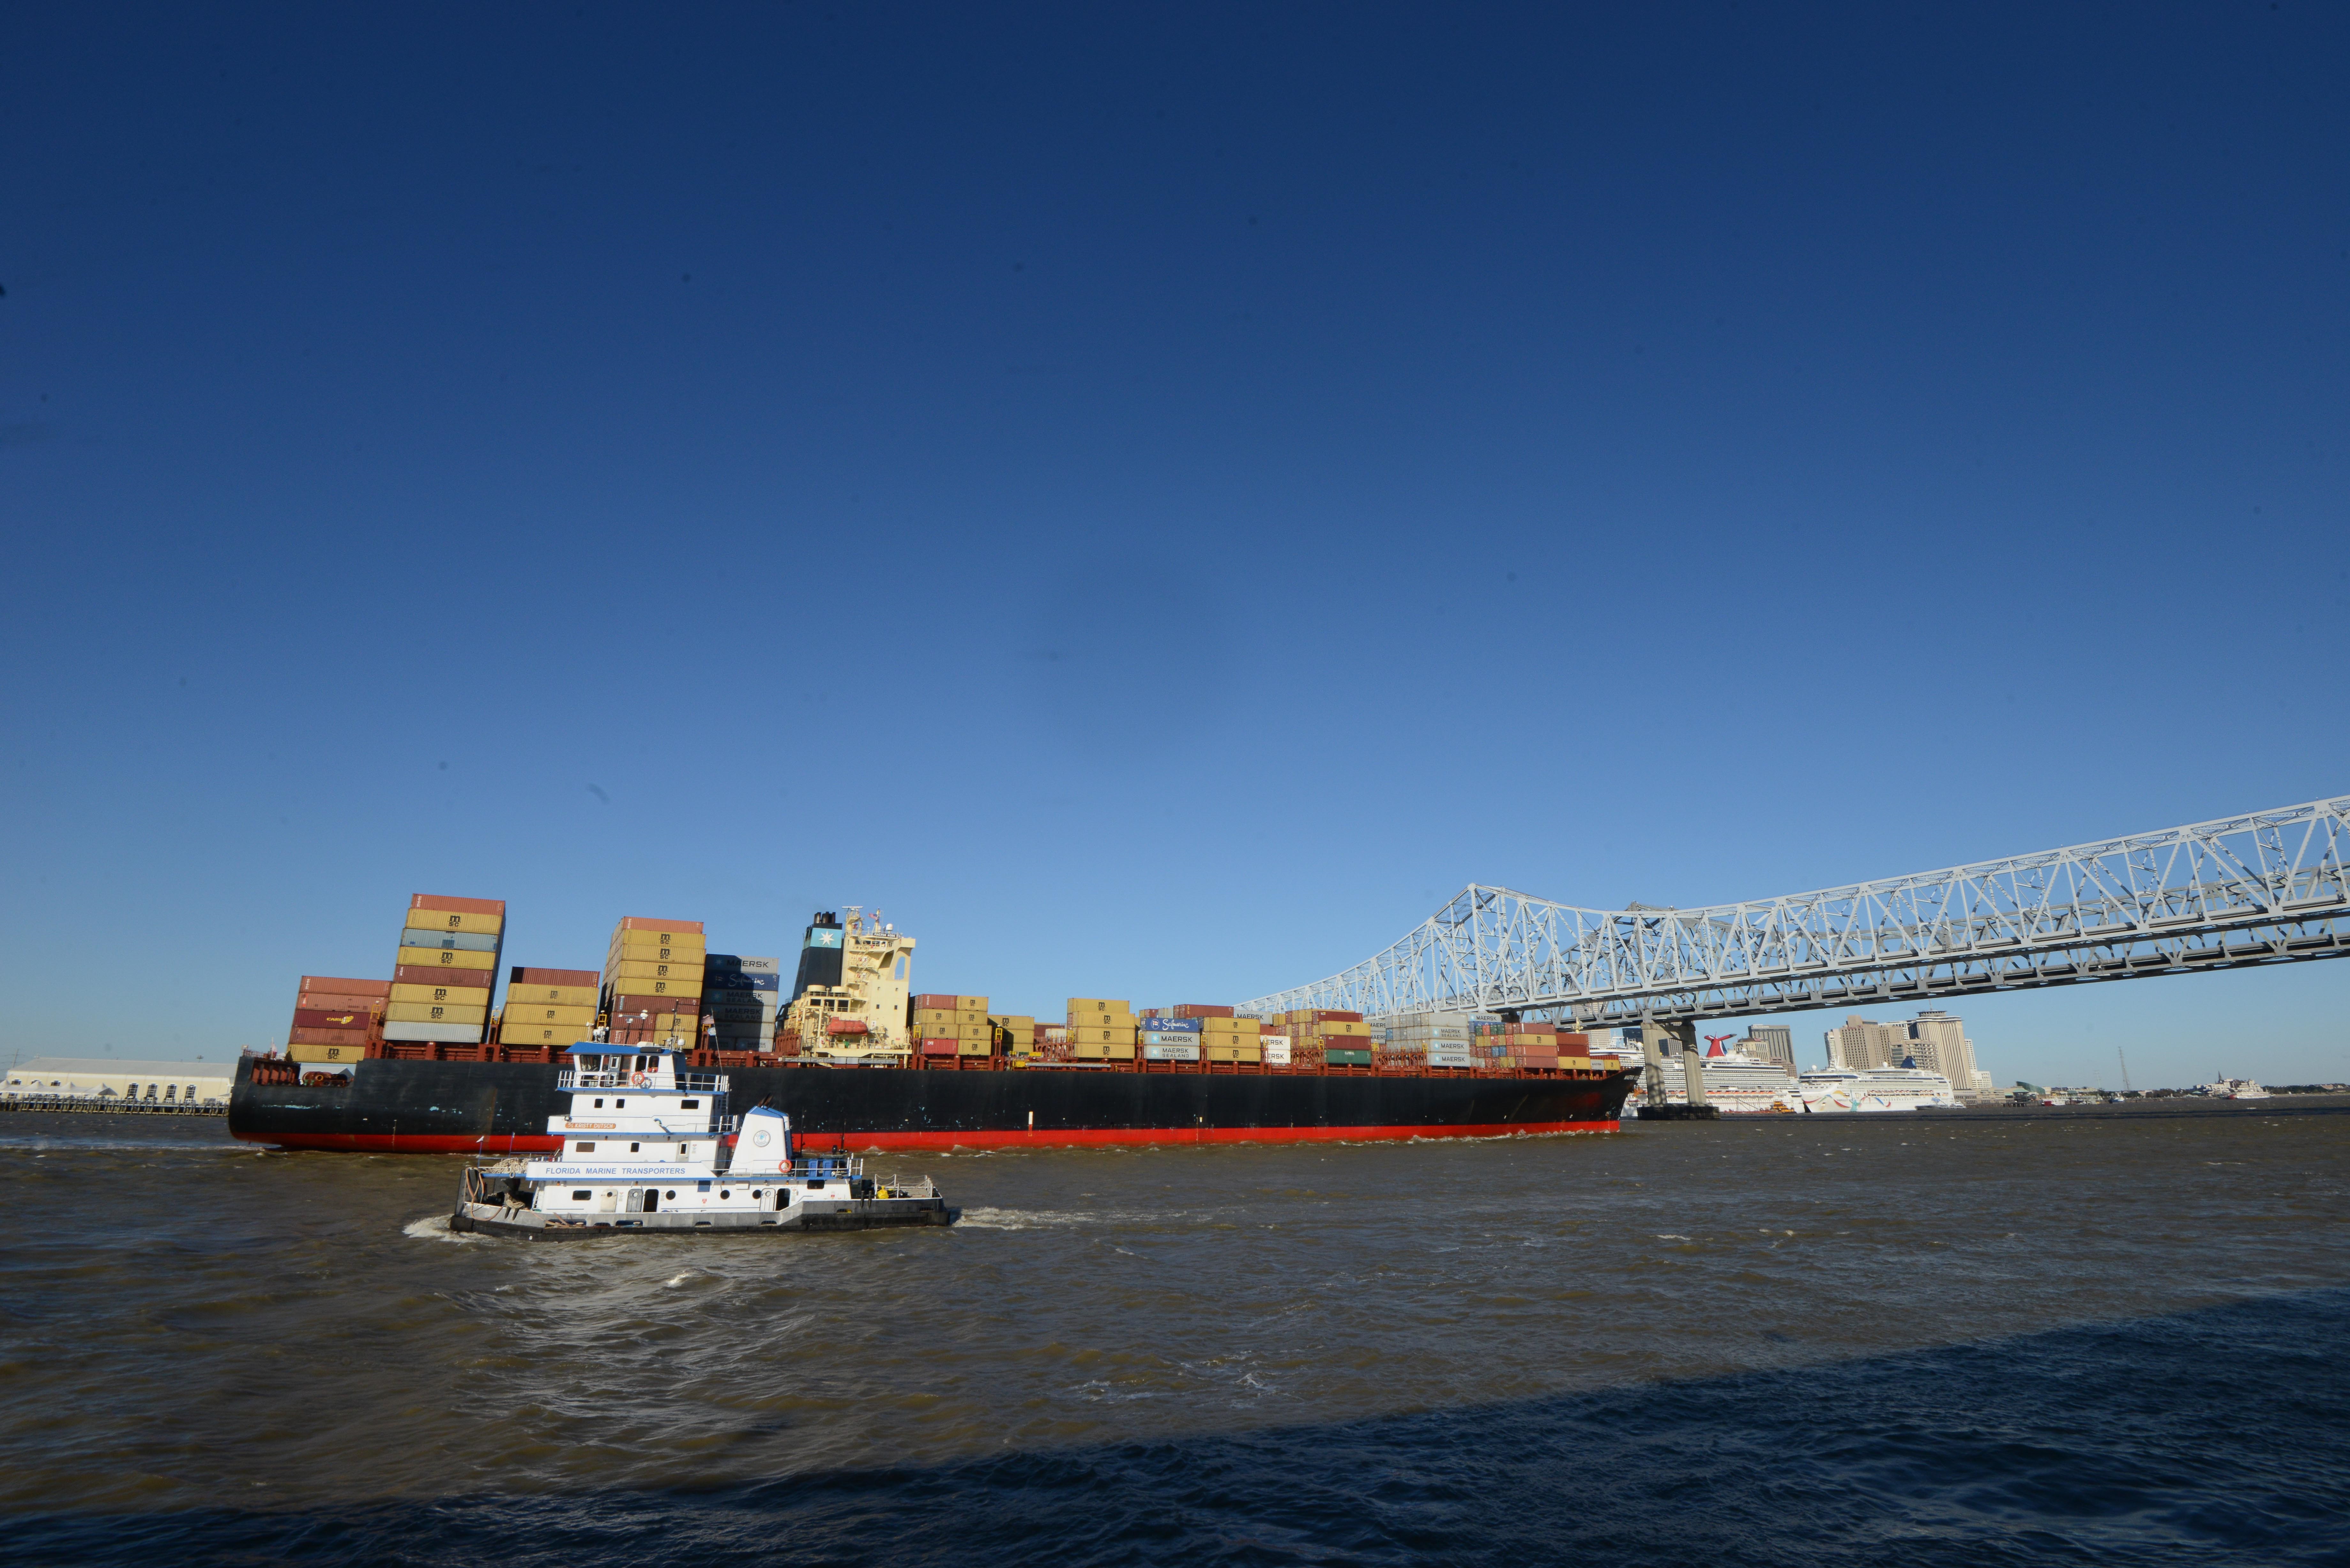 Port of New Orleans - Cruise, Cargo, City